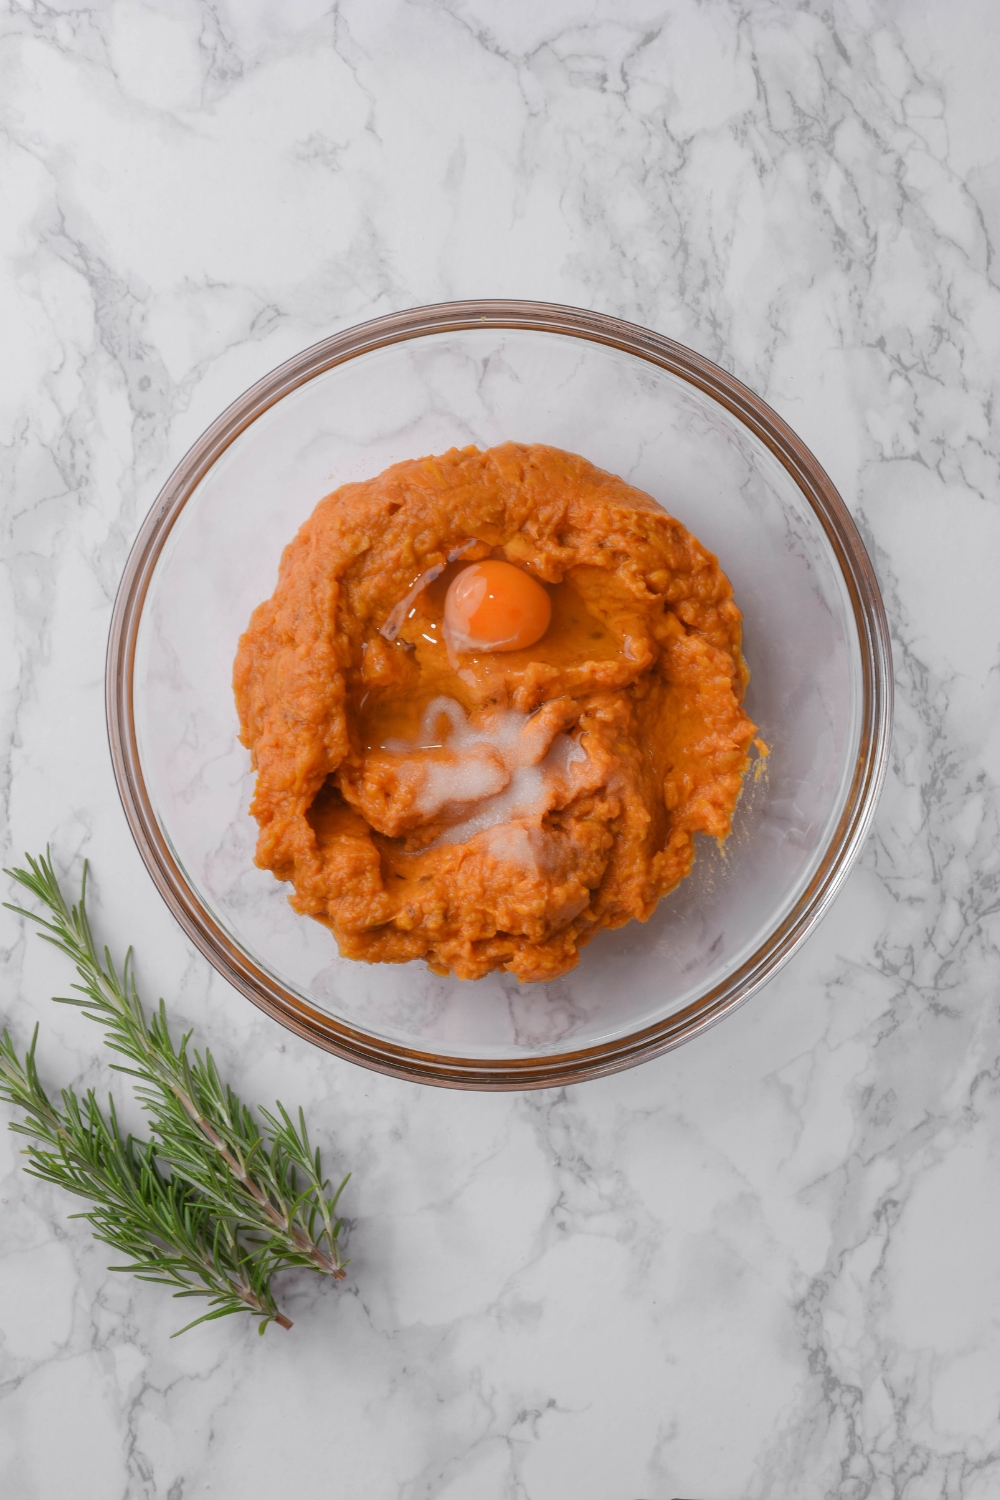 A clear bowl filled with mashed sweet potato and an unbeaten egg. The bowl is on a grey counter next to two sprigs of rosemary.